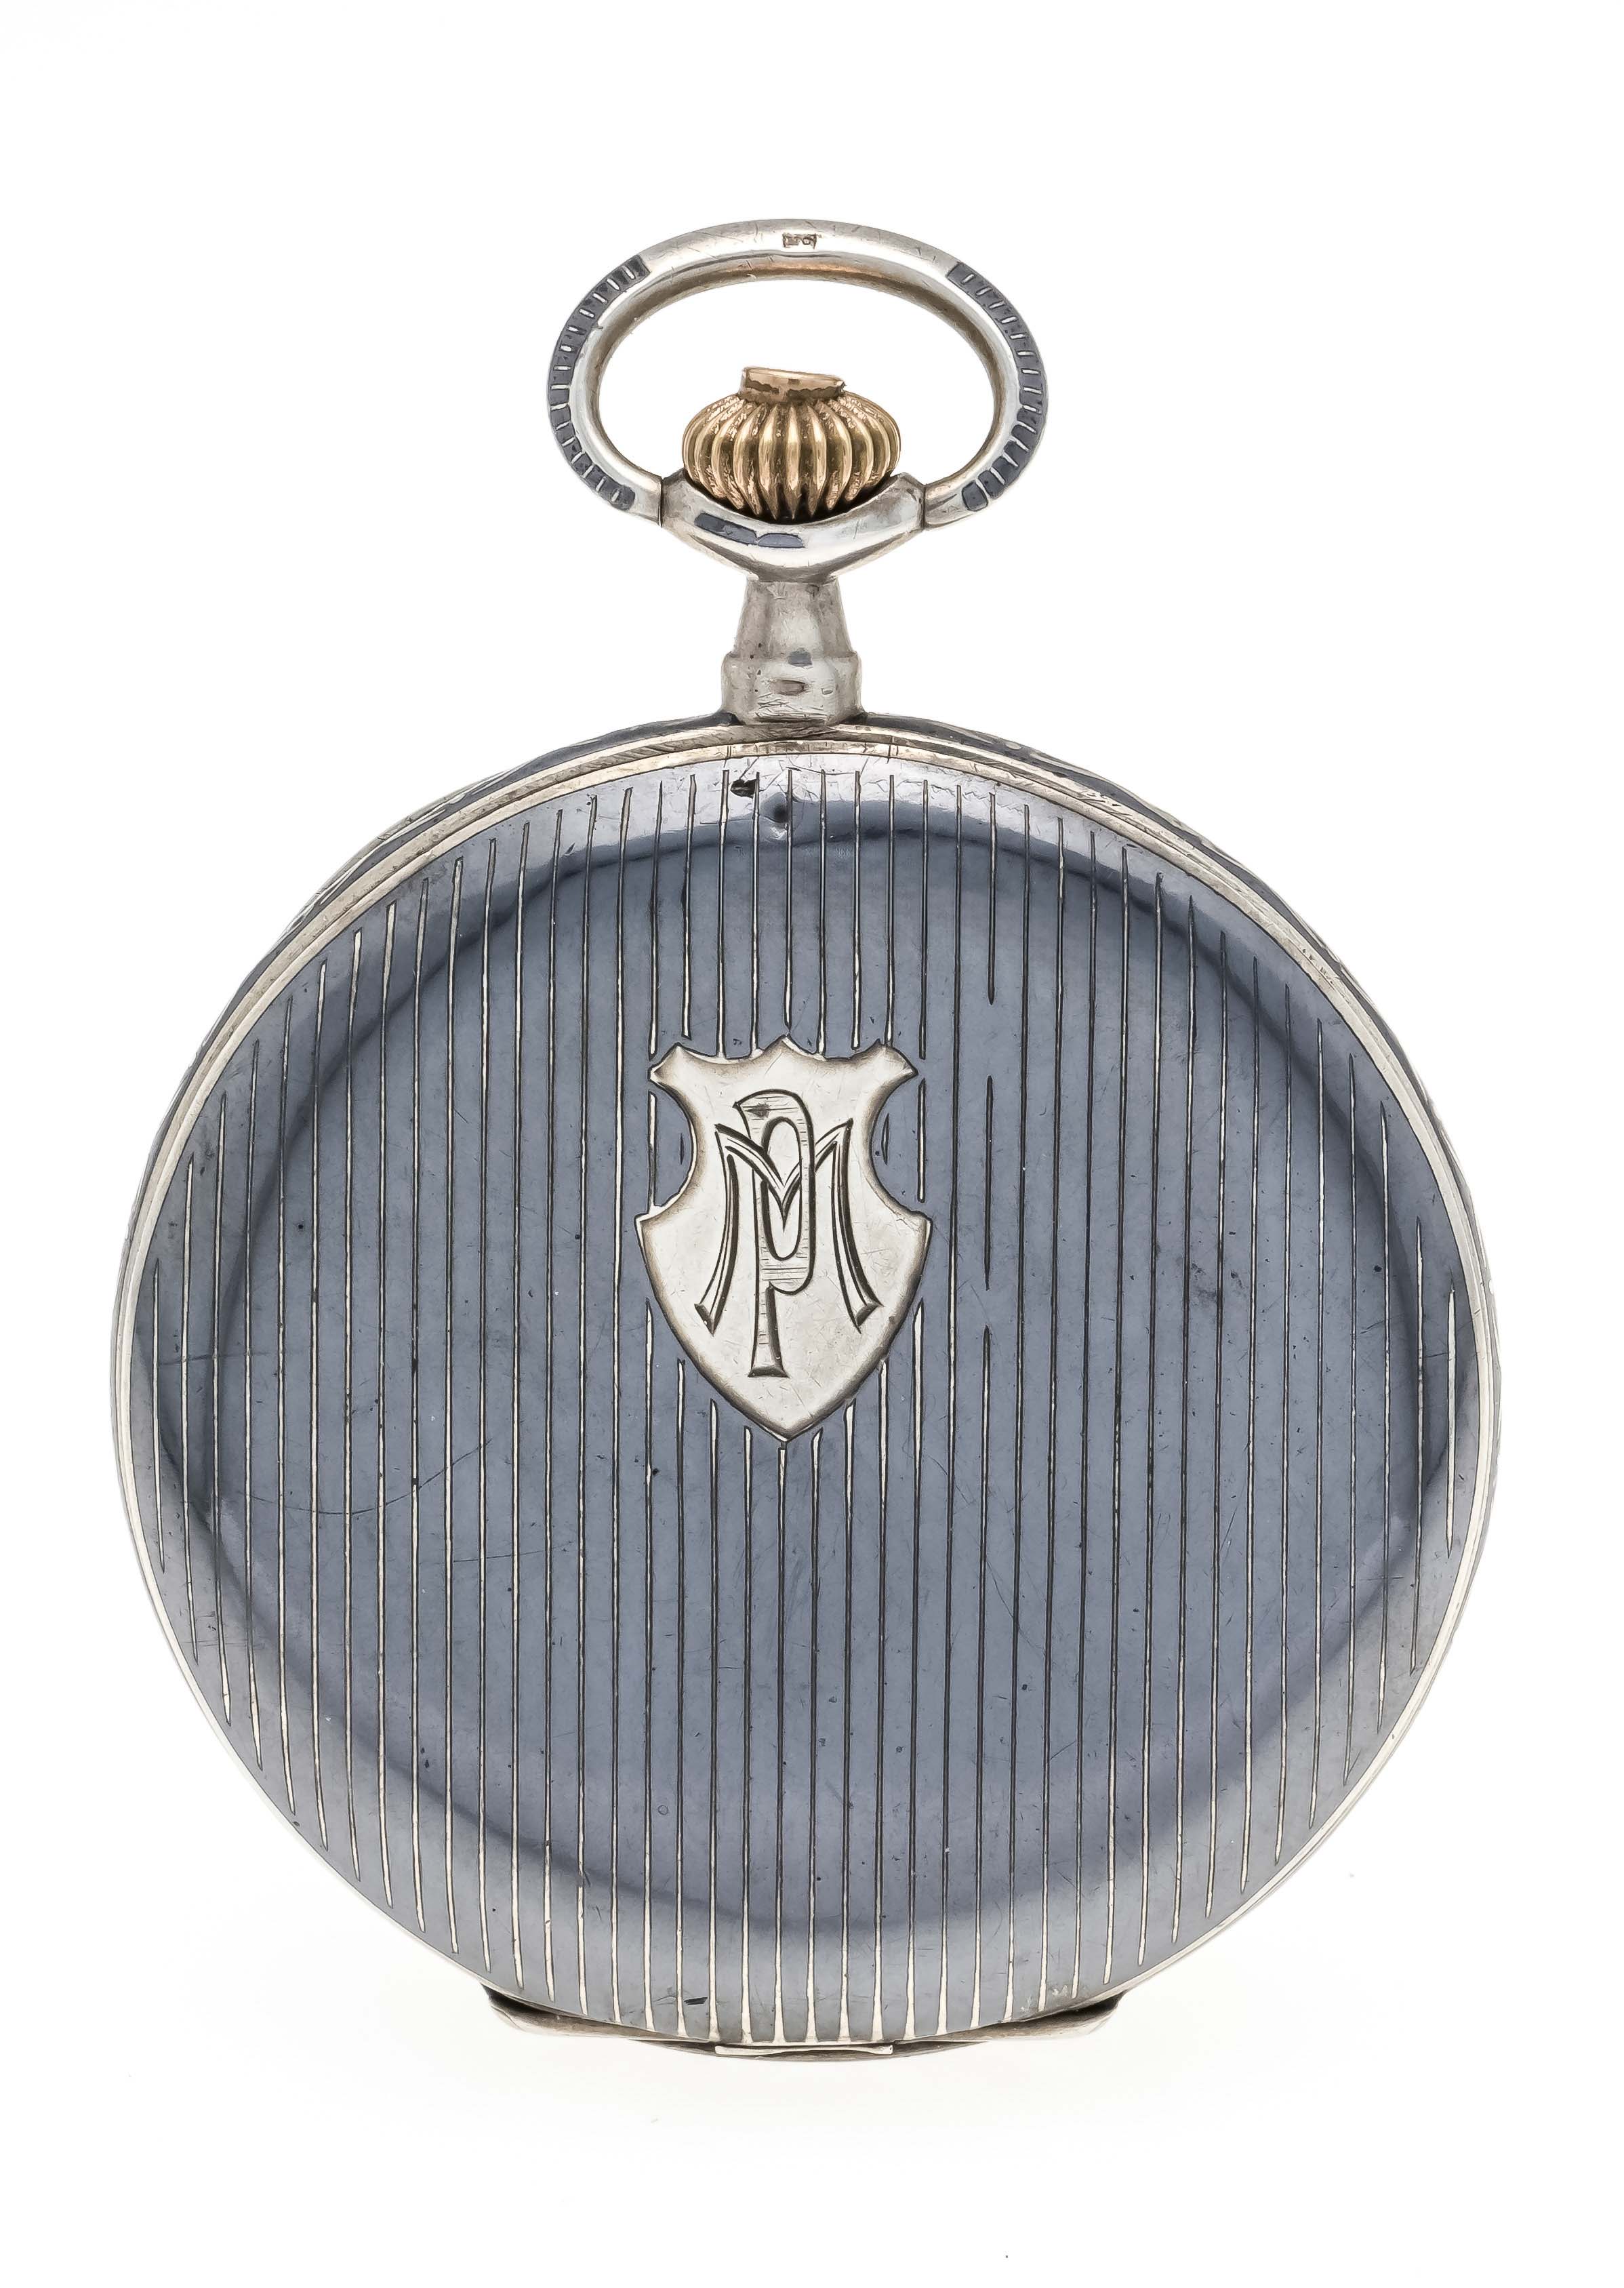 A gentleman's pocket watch with sprung cover in fine Tula Niello technique, 3 covers silver 800/000, - Image 3 of 3